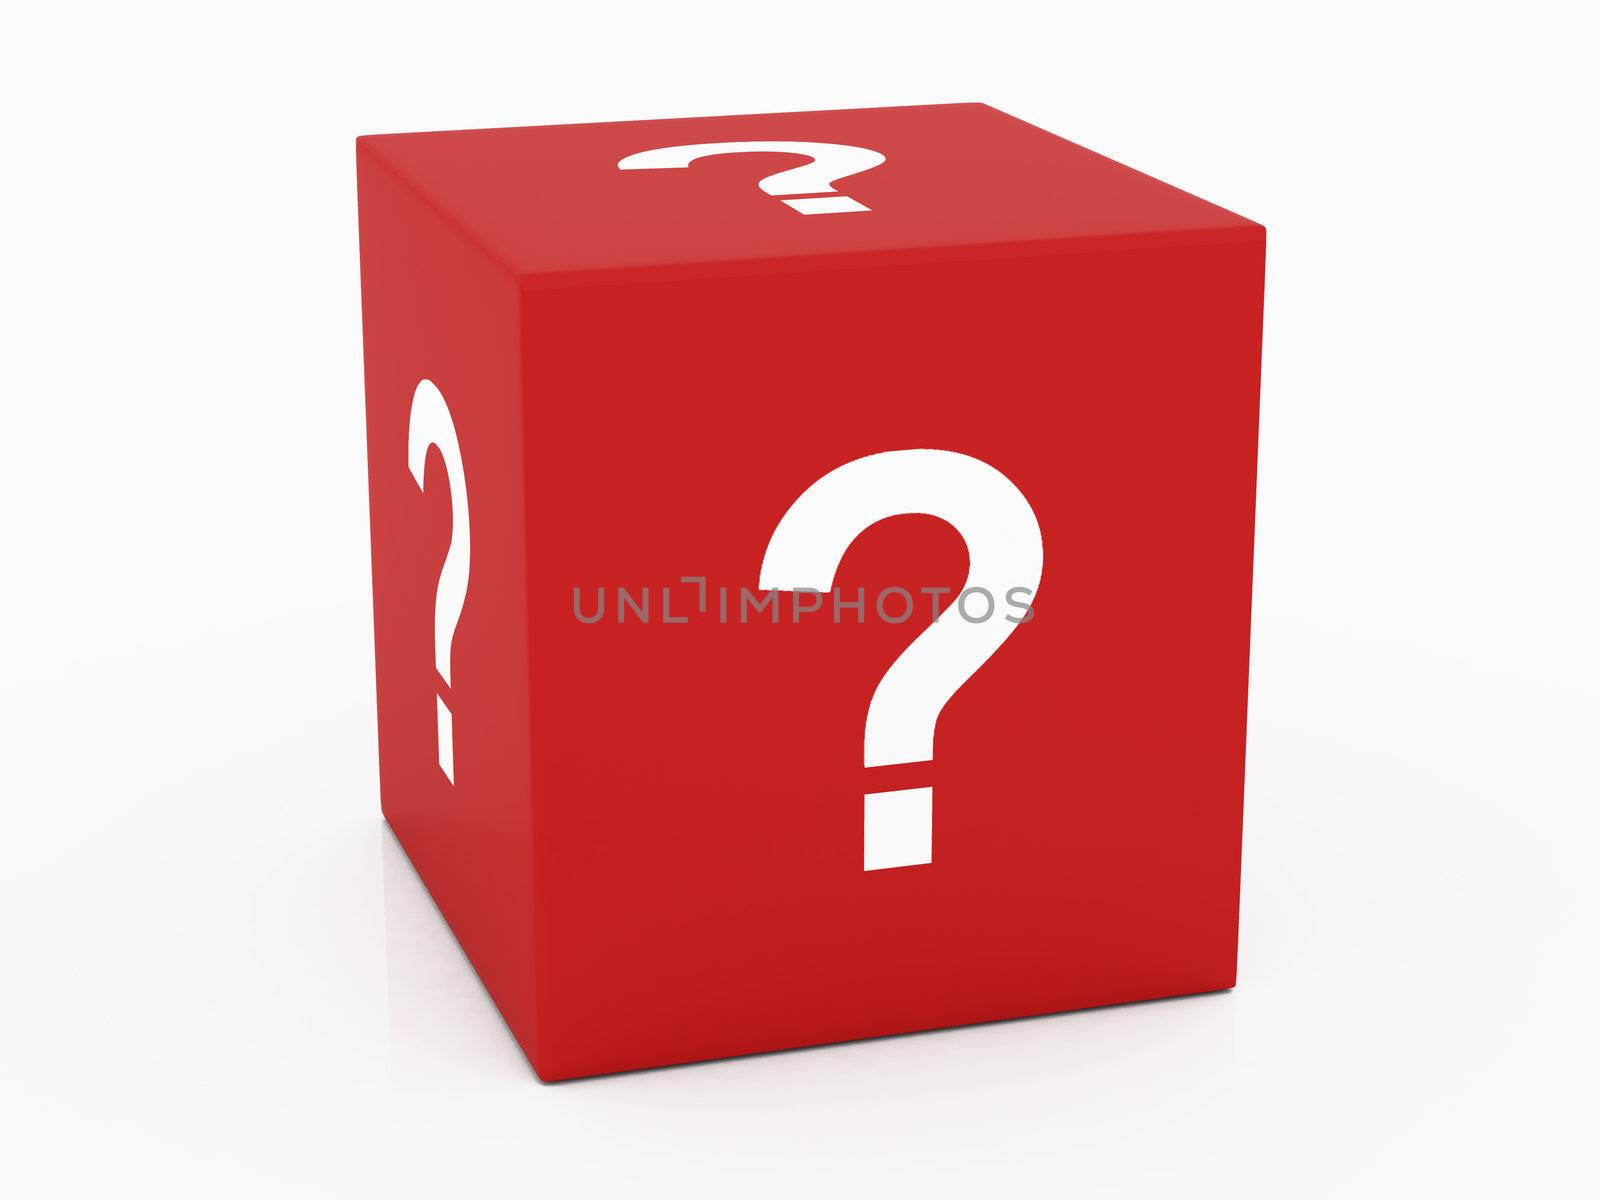 Question mark symbol in red blocks on white background.